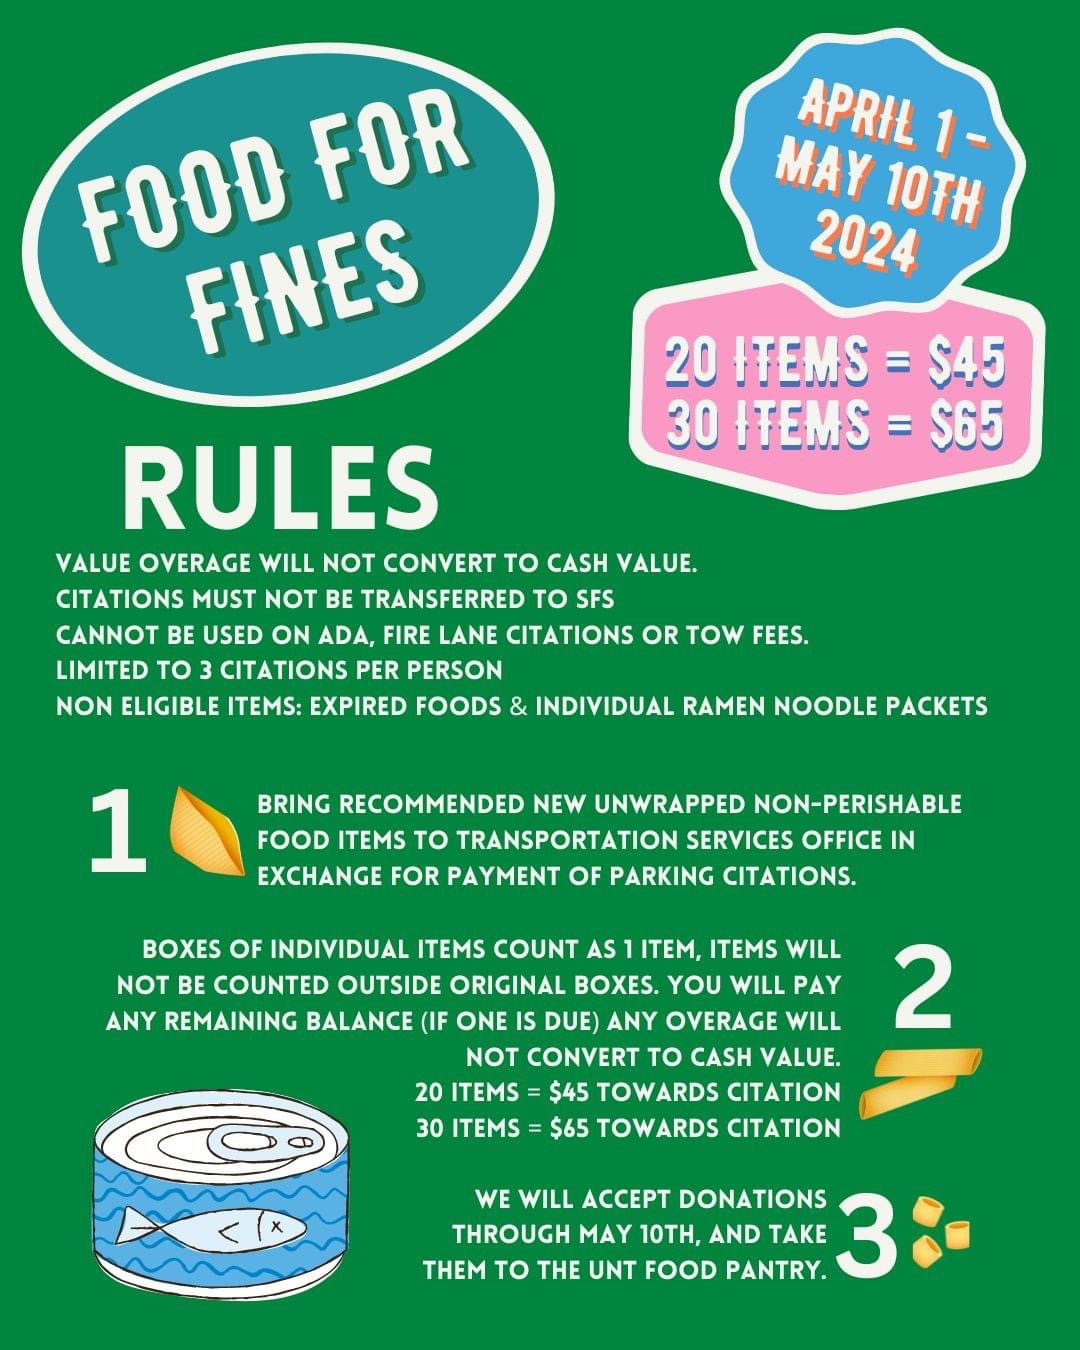 Food for fines logo with rules written on them